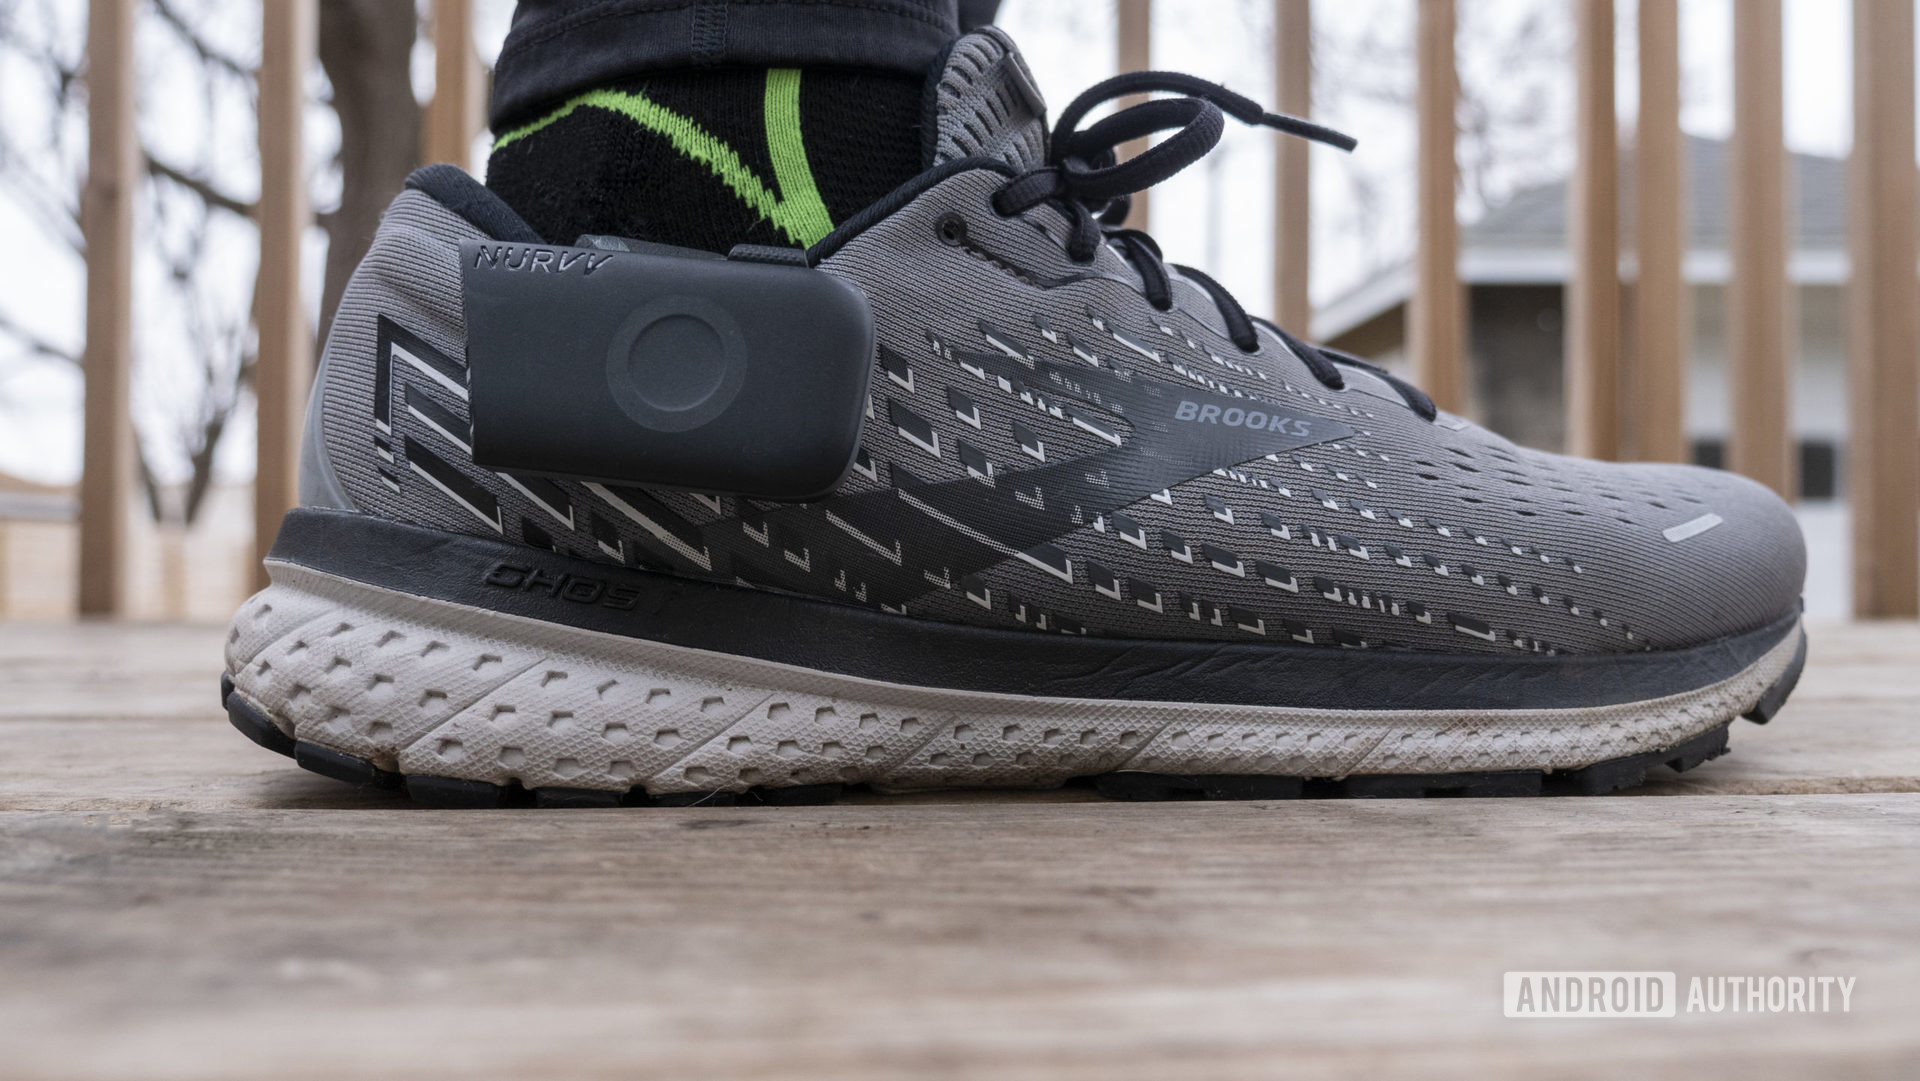 Nathaniel Ward Lada mental NURVV Run review: Smart running insoles to help you improve